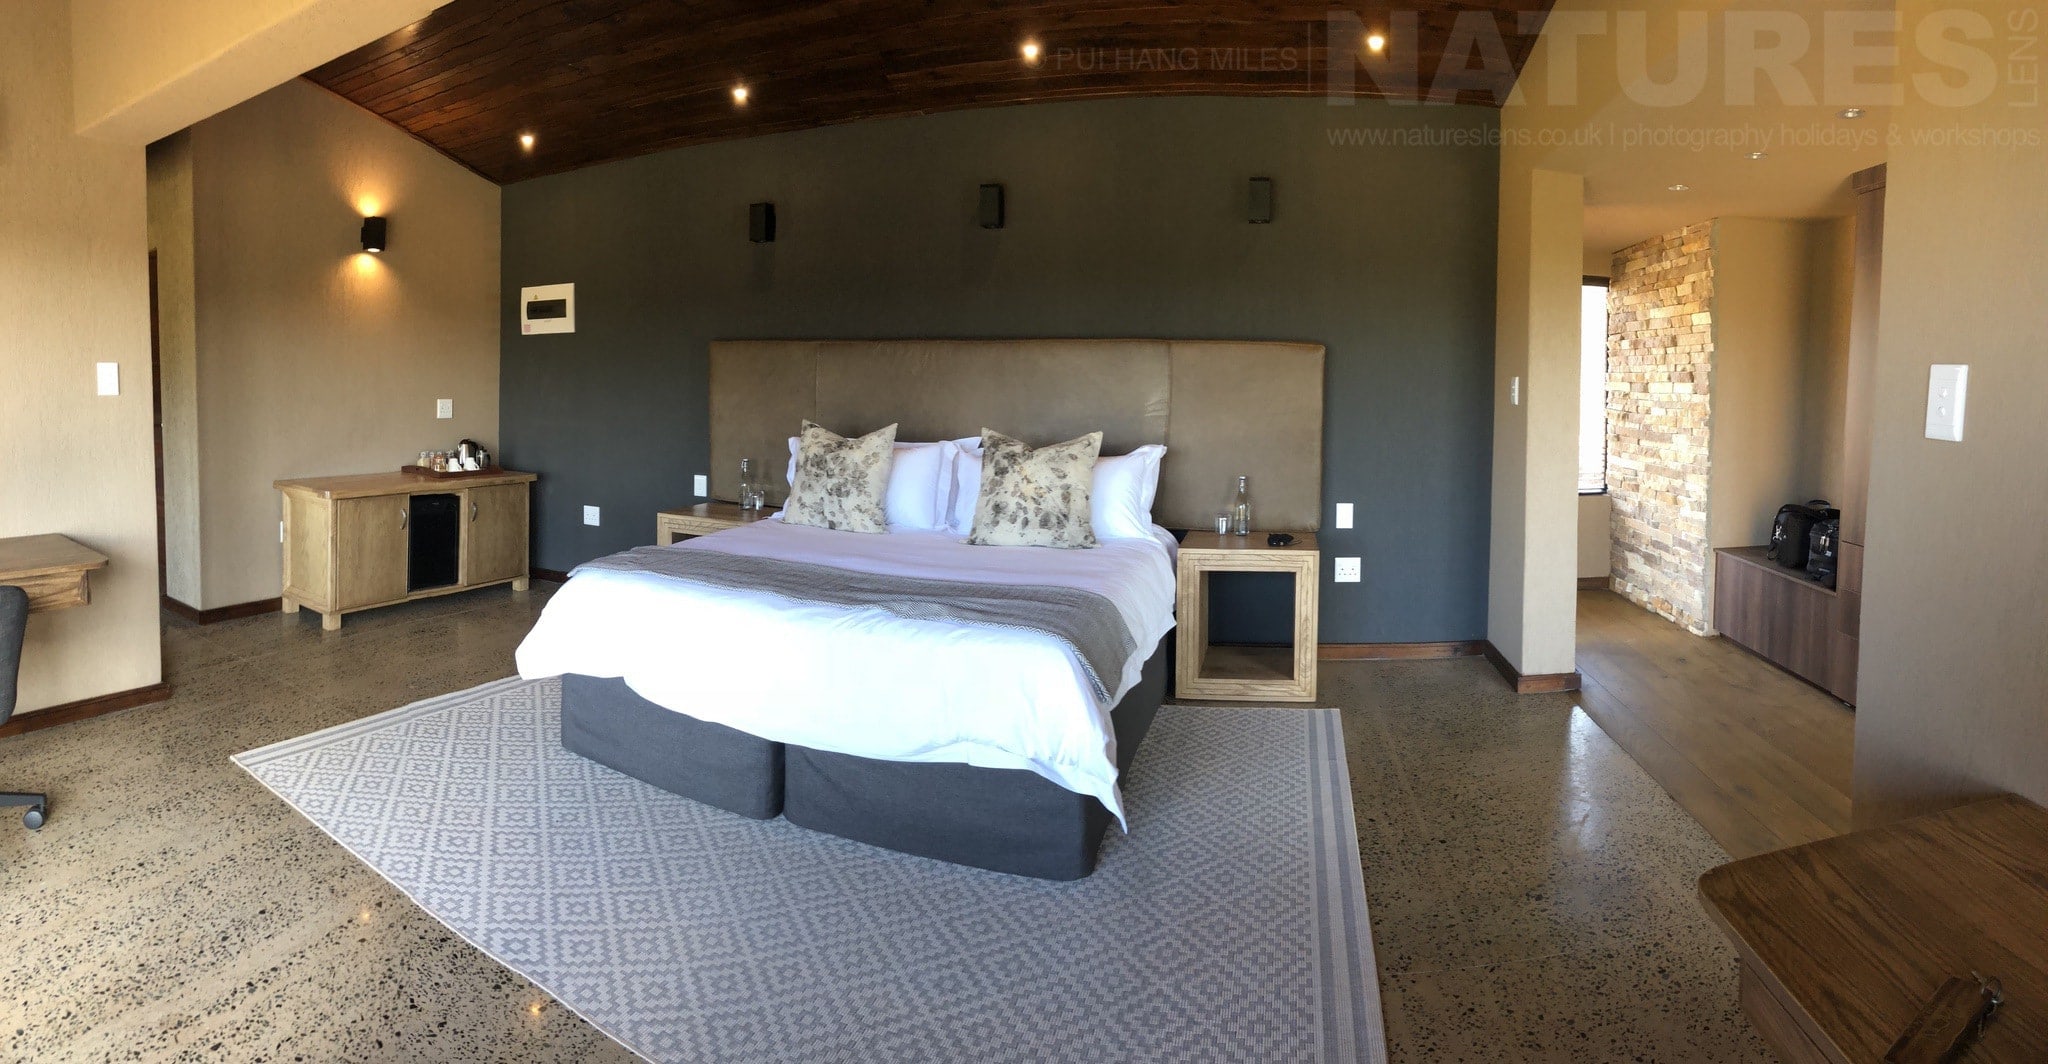 A Panoramic View Of One Of The Bedrooms At Zimanga Reserve The Location For The Natureslens Wildlife Of Zimanga Photography Holiday